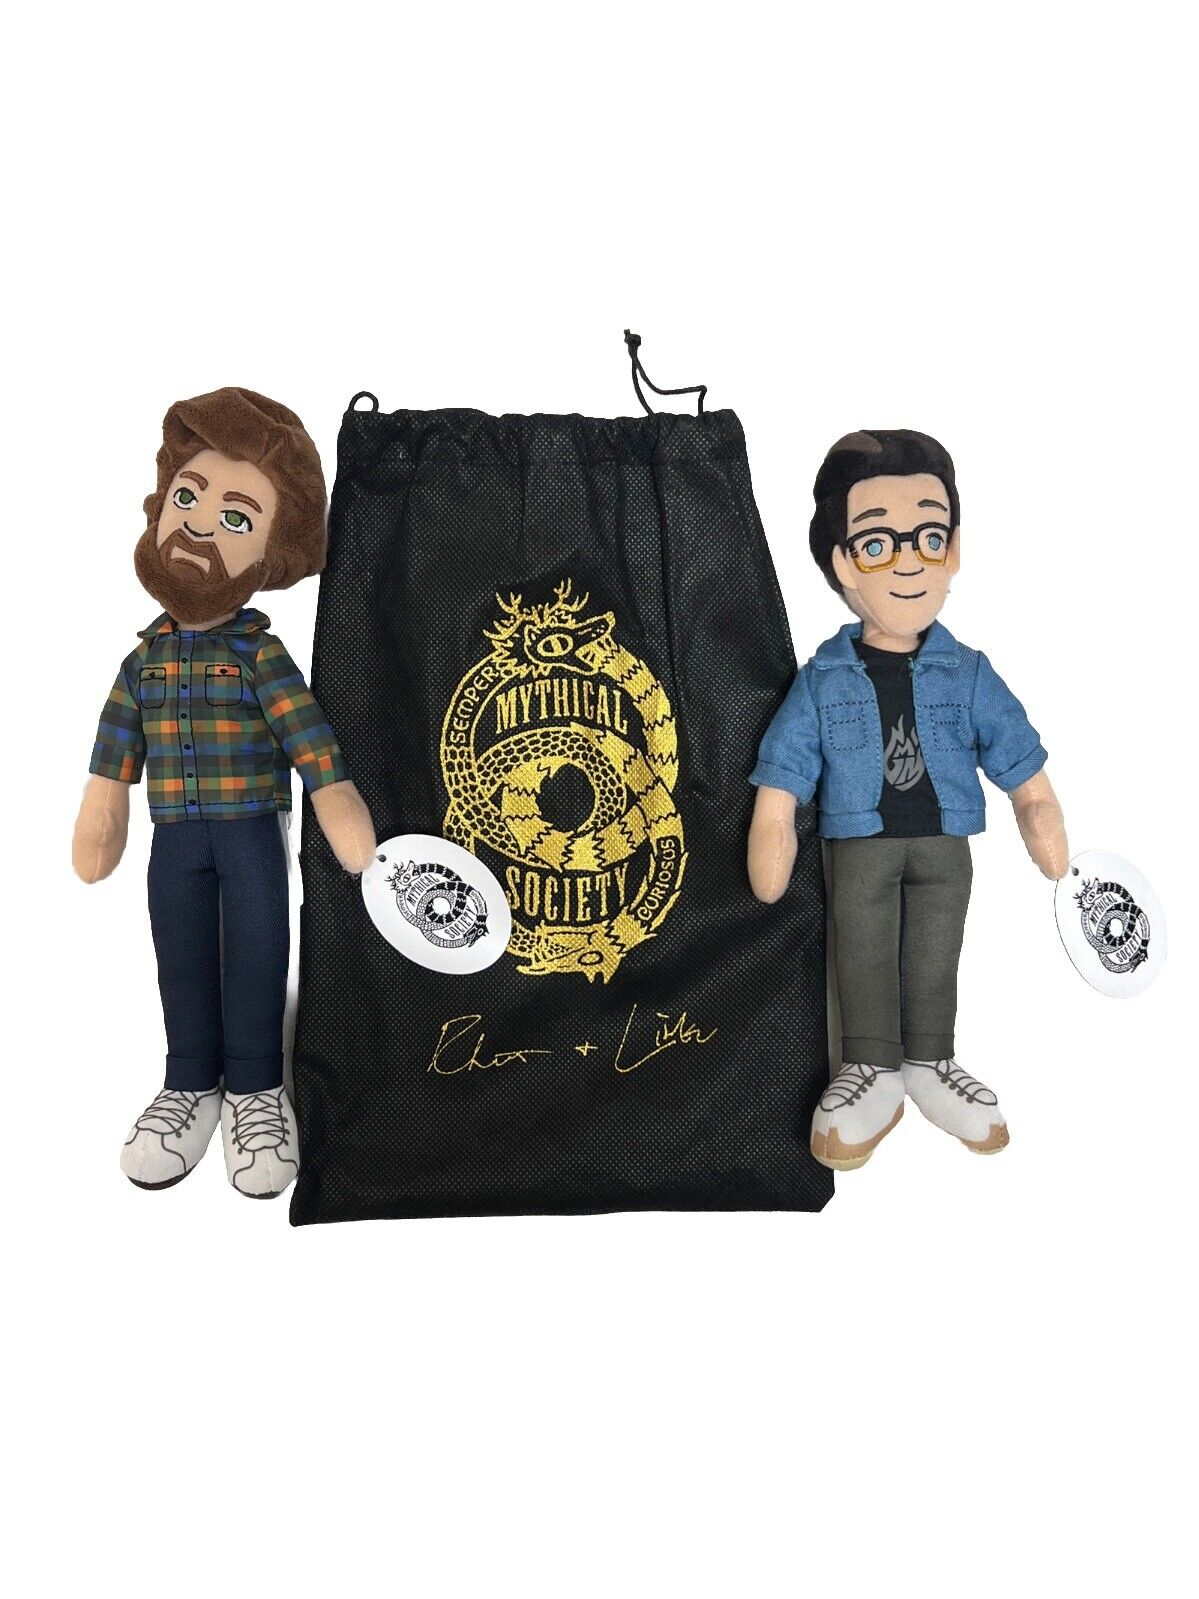 Rhett and Link Talking Plushies Good Mythical Society Exclusive